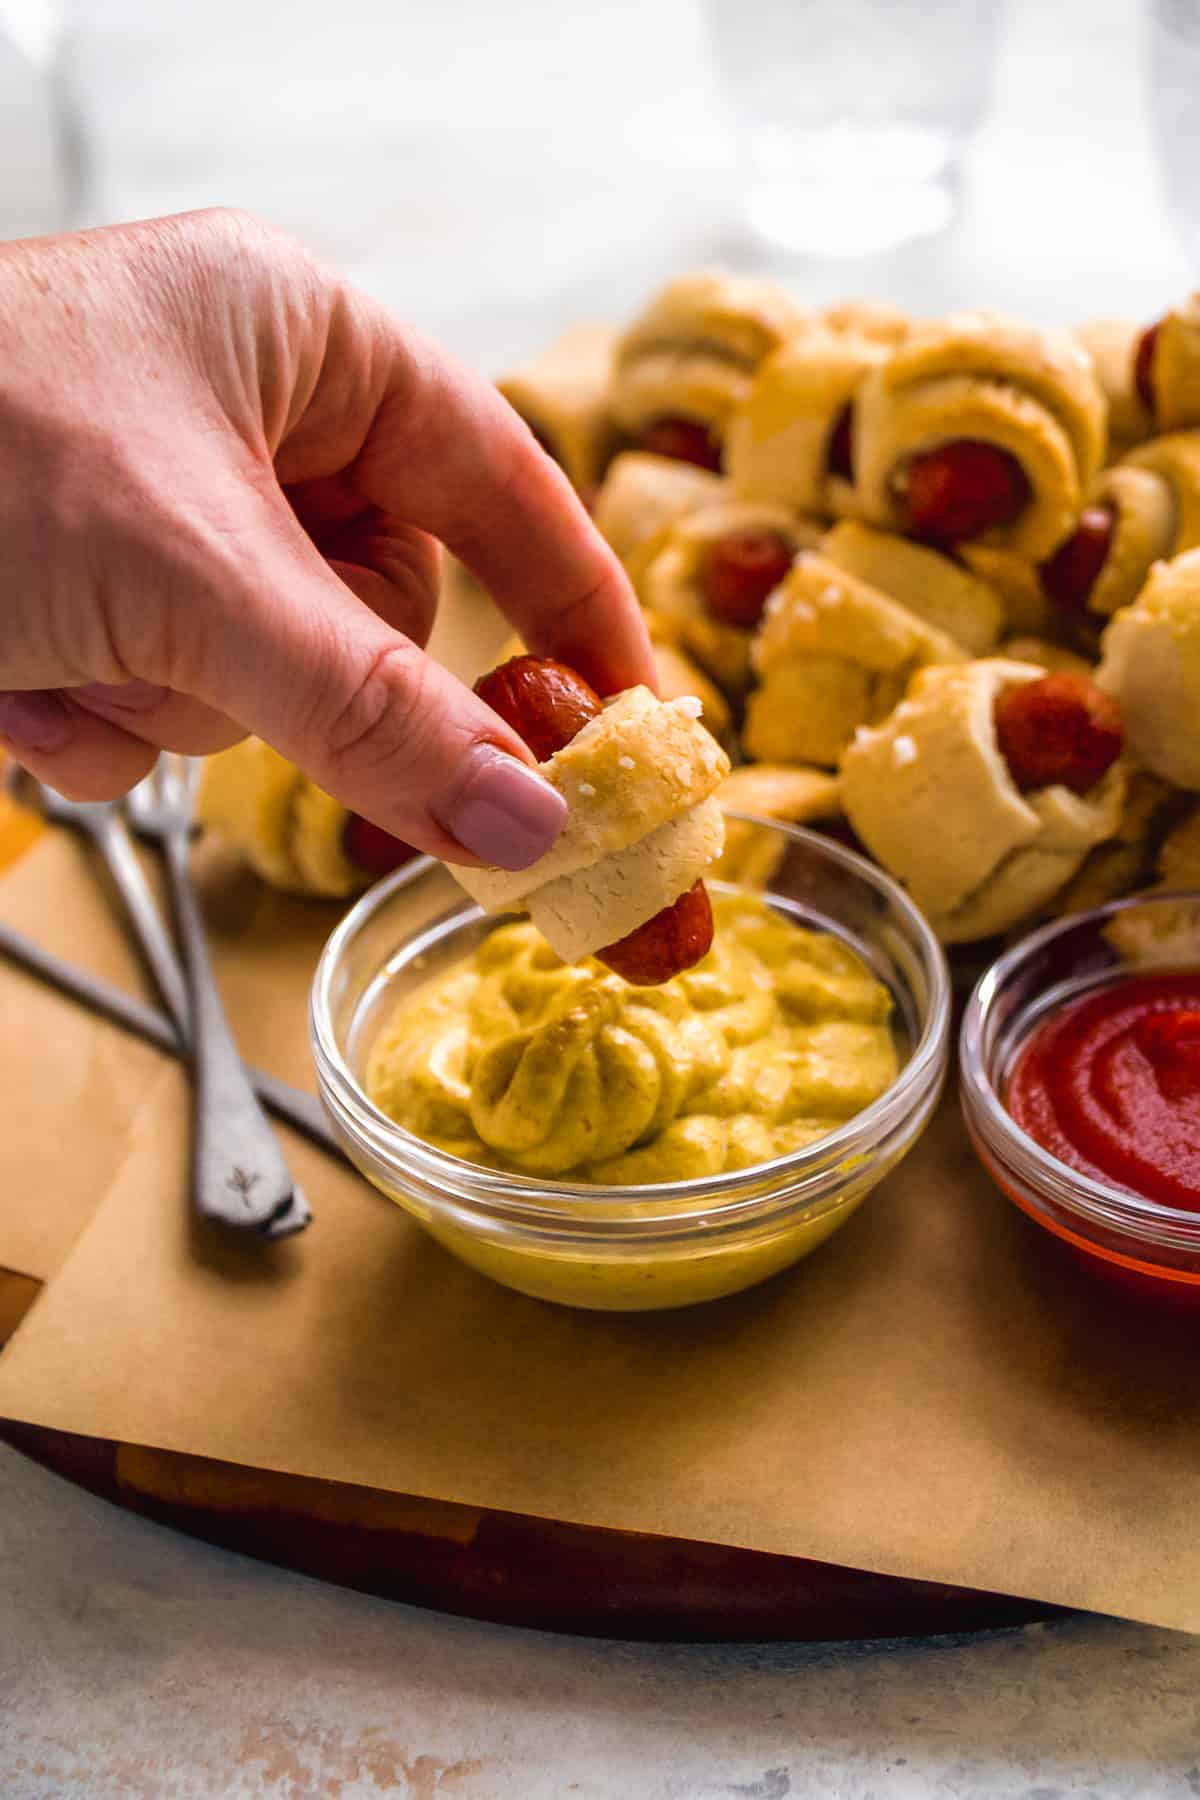 Person about to dip a pig in a blanket in mustard.